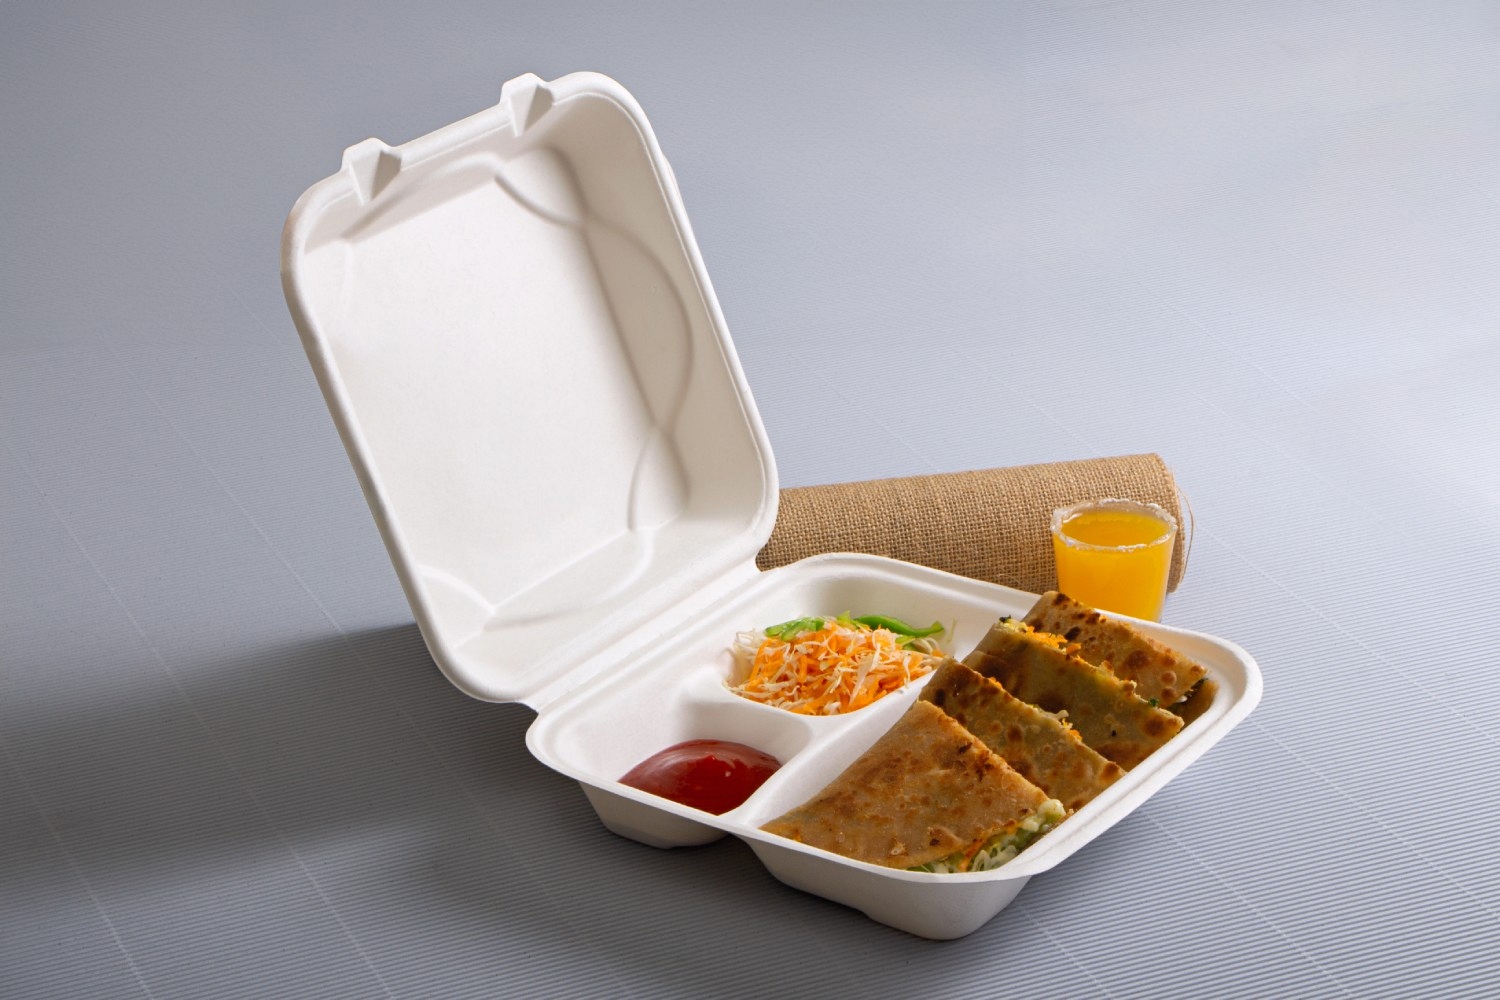 3 Compartments Hinged Takeout Boxes